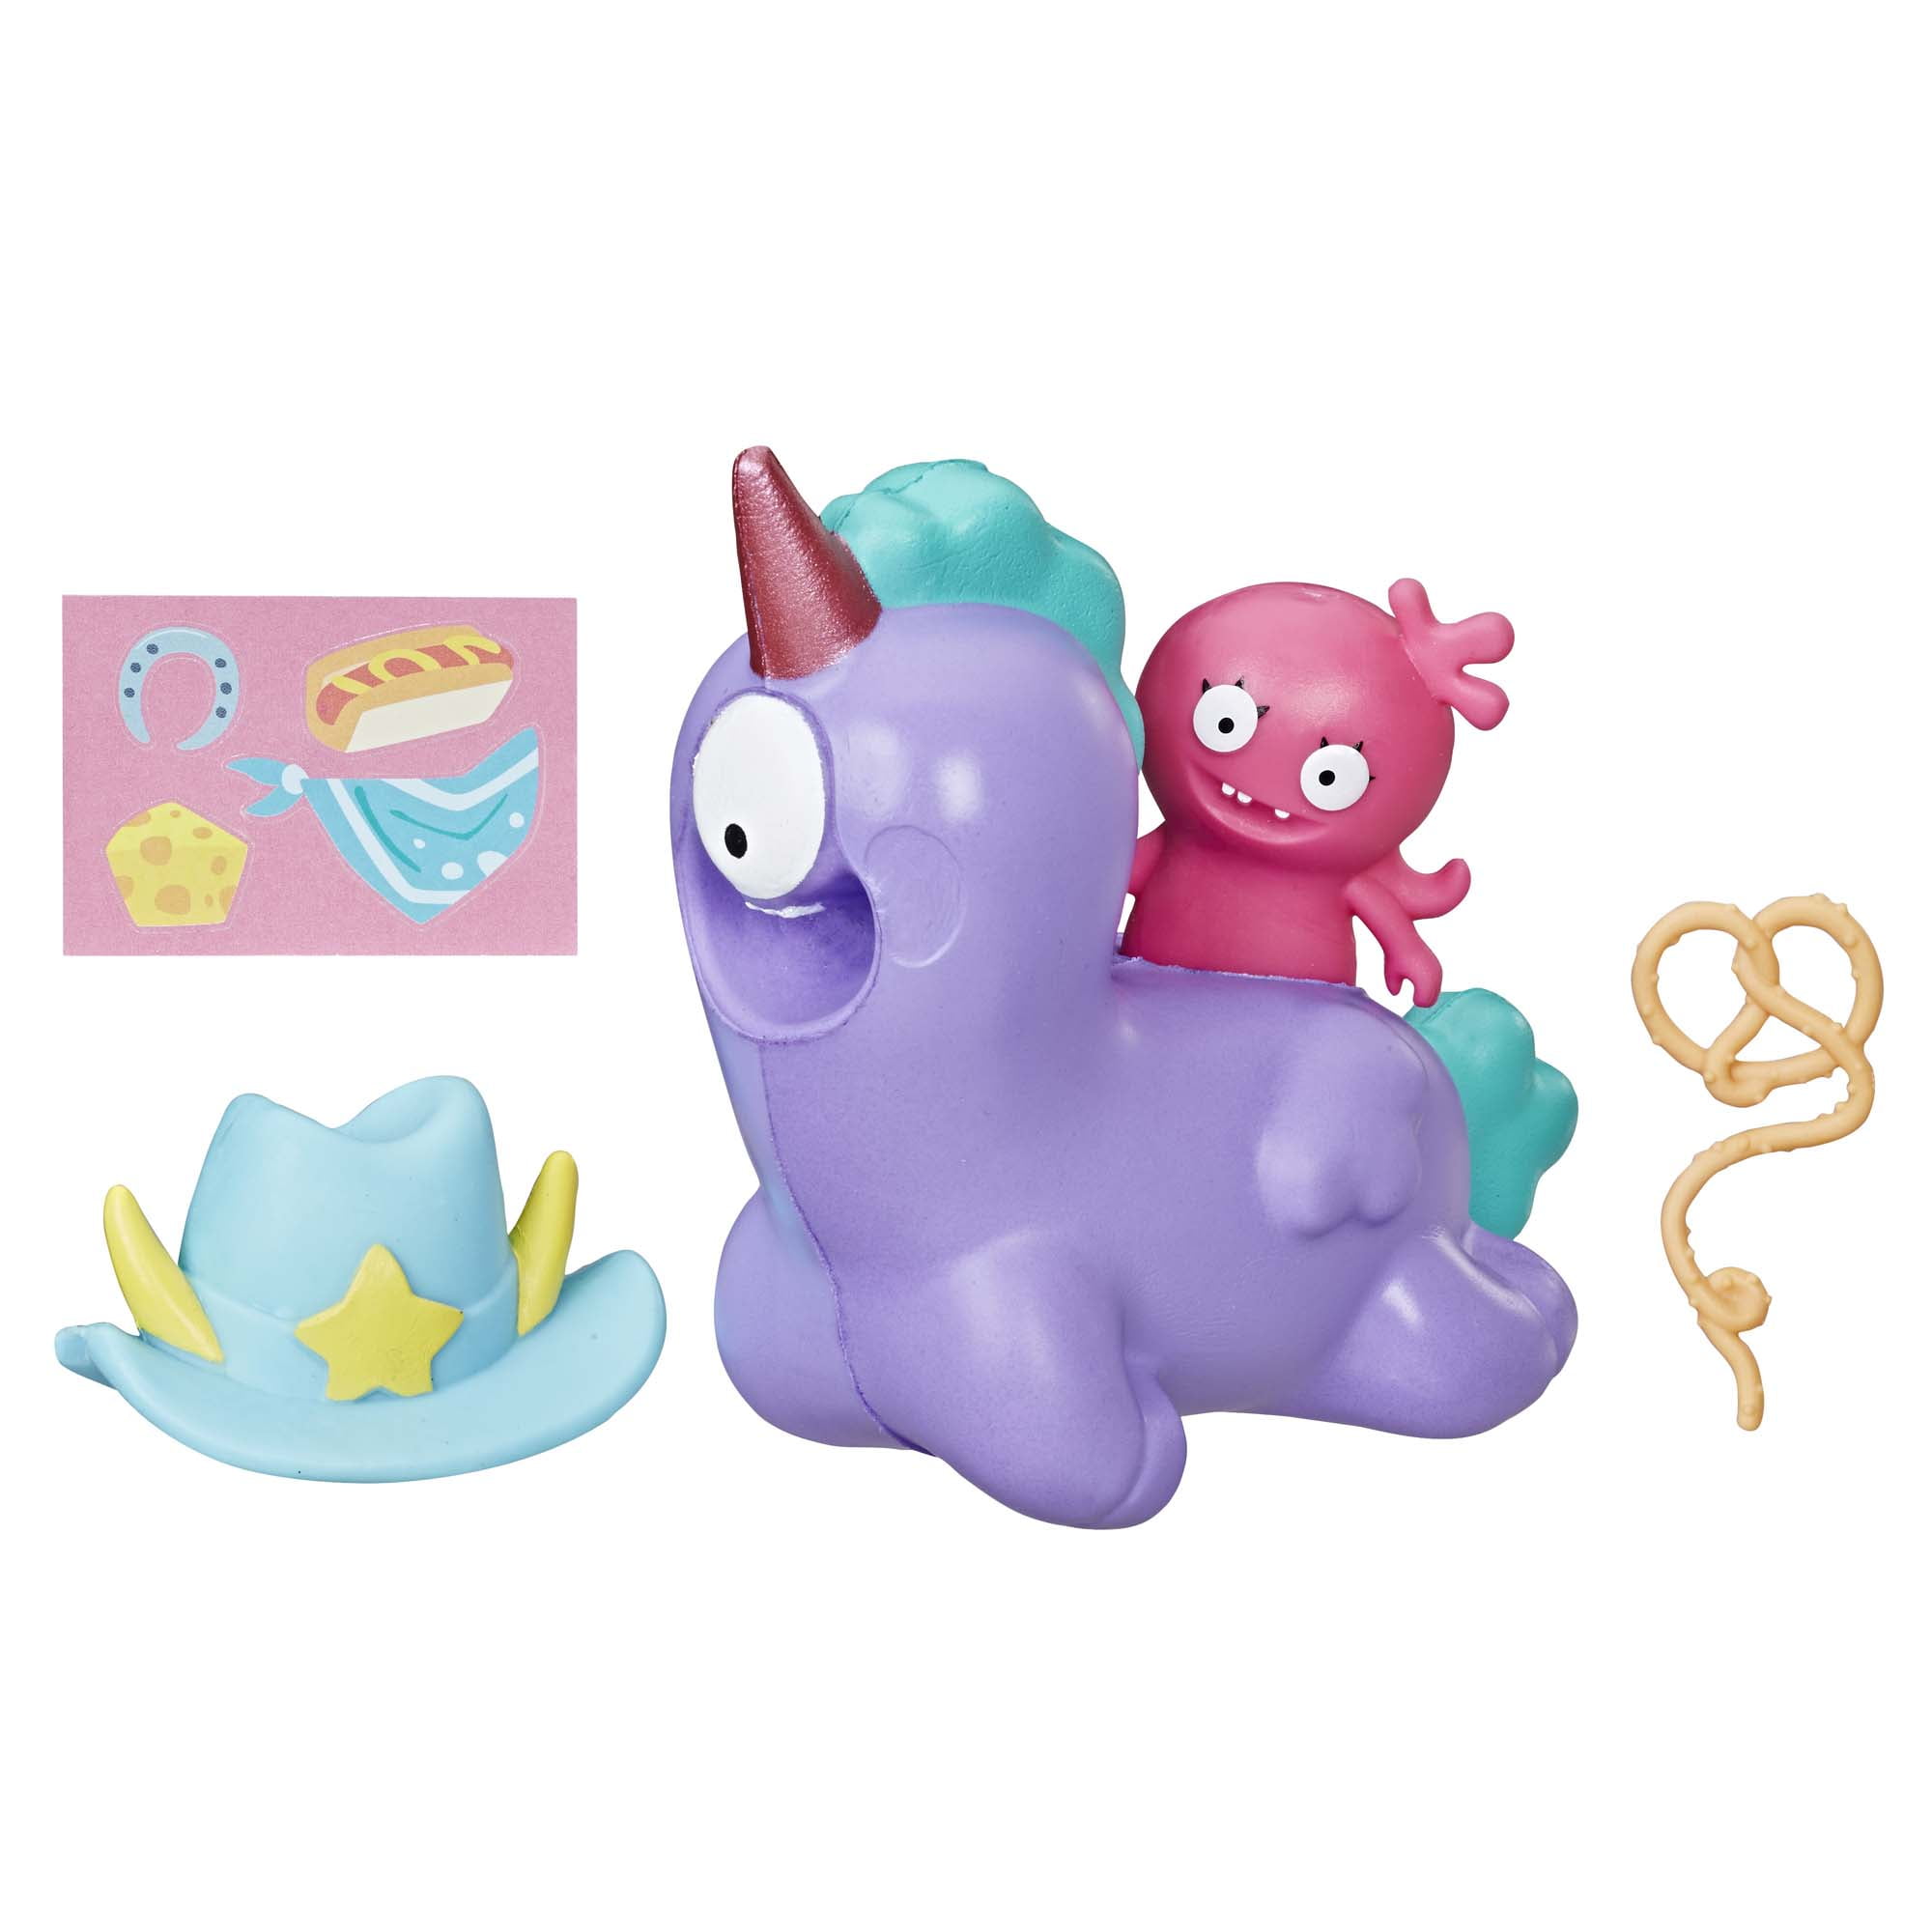 UglyDolls Moxy and Squish-and-Go Peggy, Includes 2 Figures with Accessories  pic